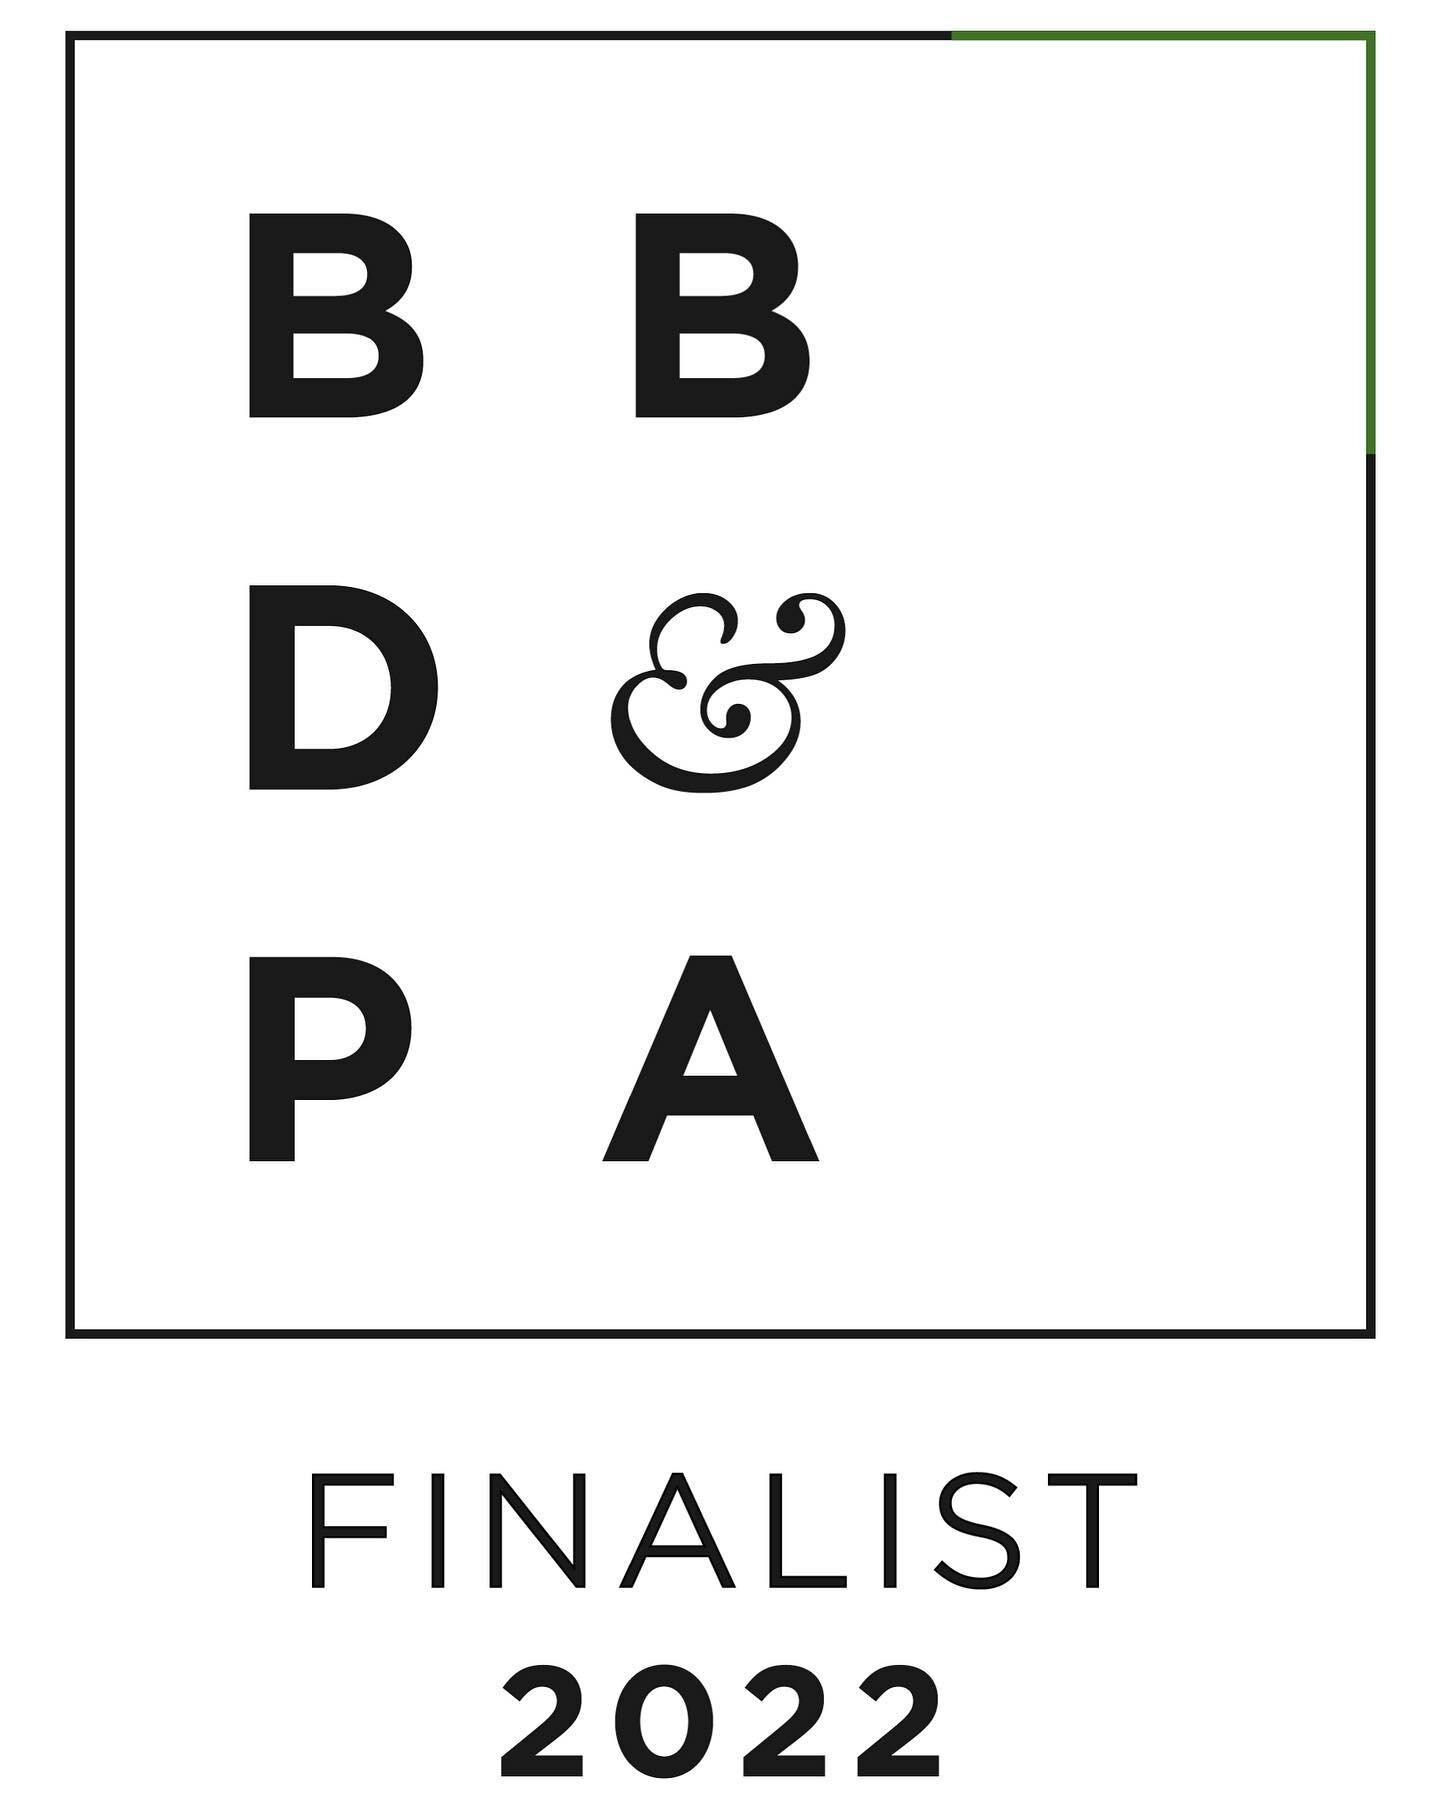 I am utterly delighted to announce that Manderley Press has been shortlisted for this year's @bbdpawards / British Book Design and Production Awards - in the category for Brand / Series identity.

This is a huge honour, particularly given the other s